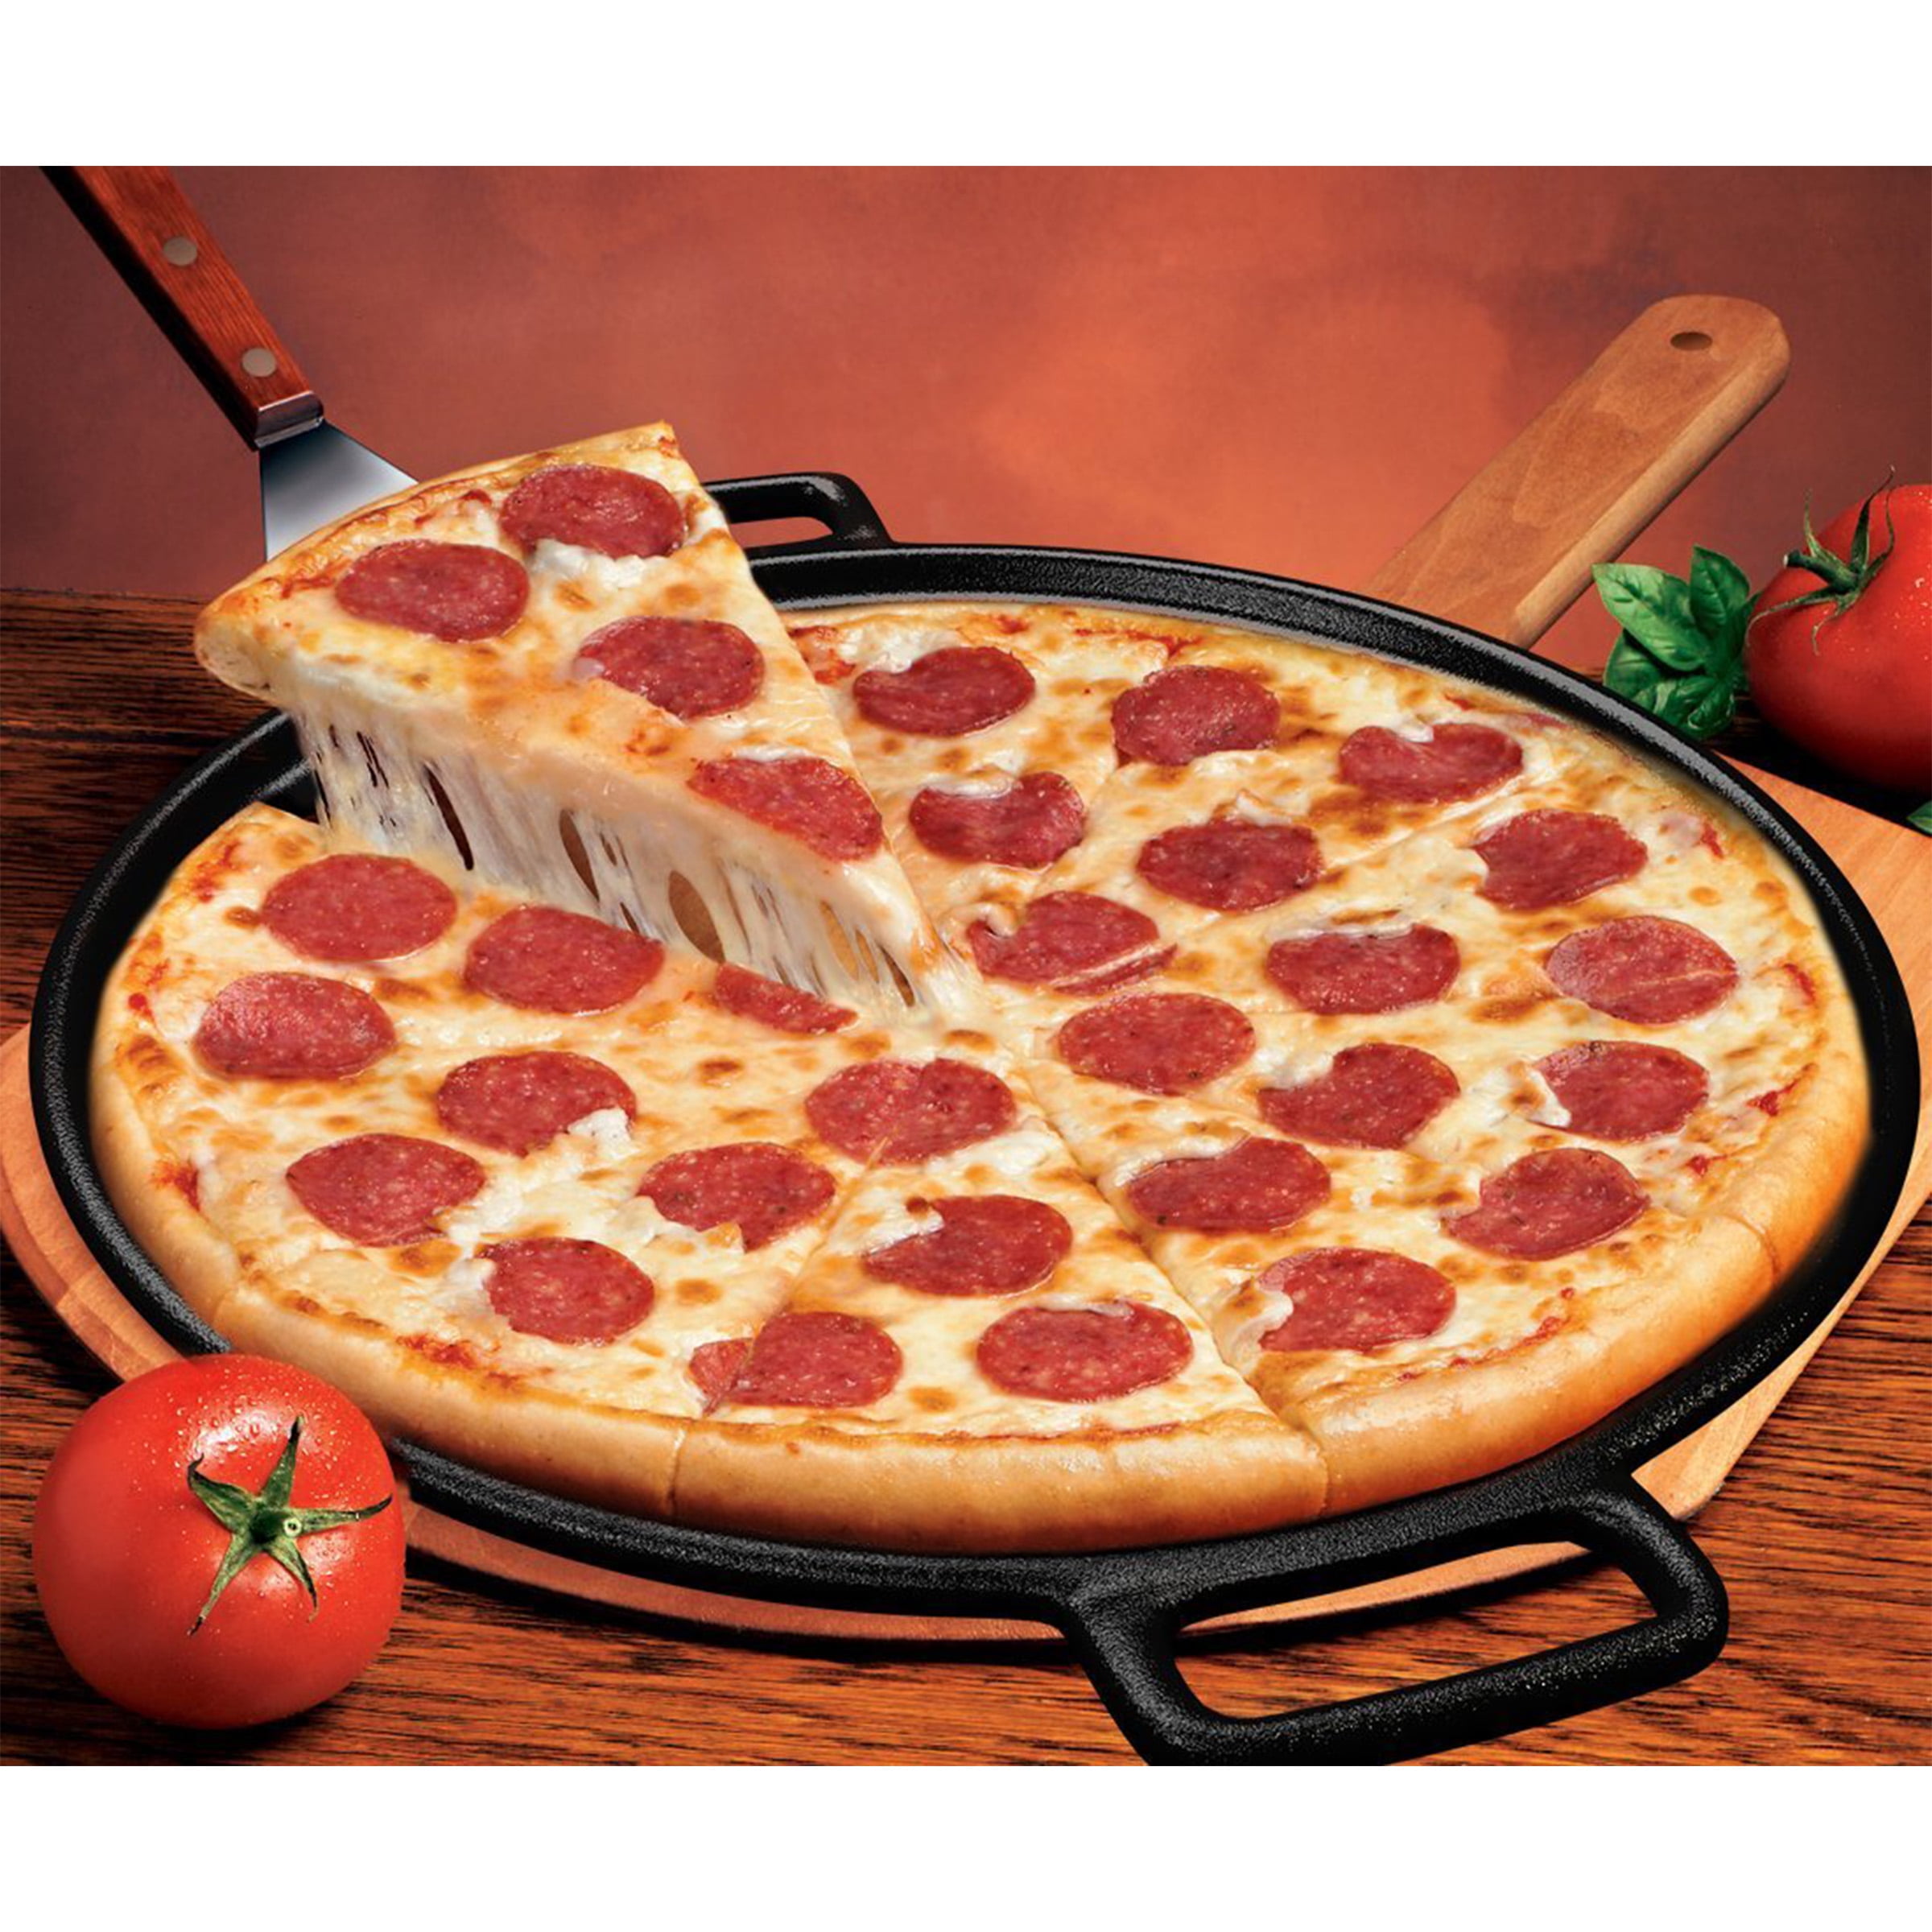 Legend Cast iron Pizza Pan  14” Steel Pizza Cooker with Easy Grip